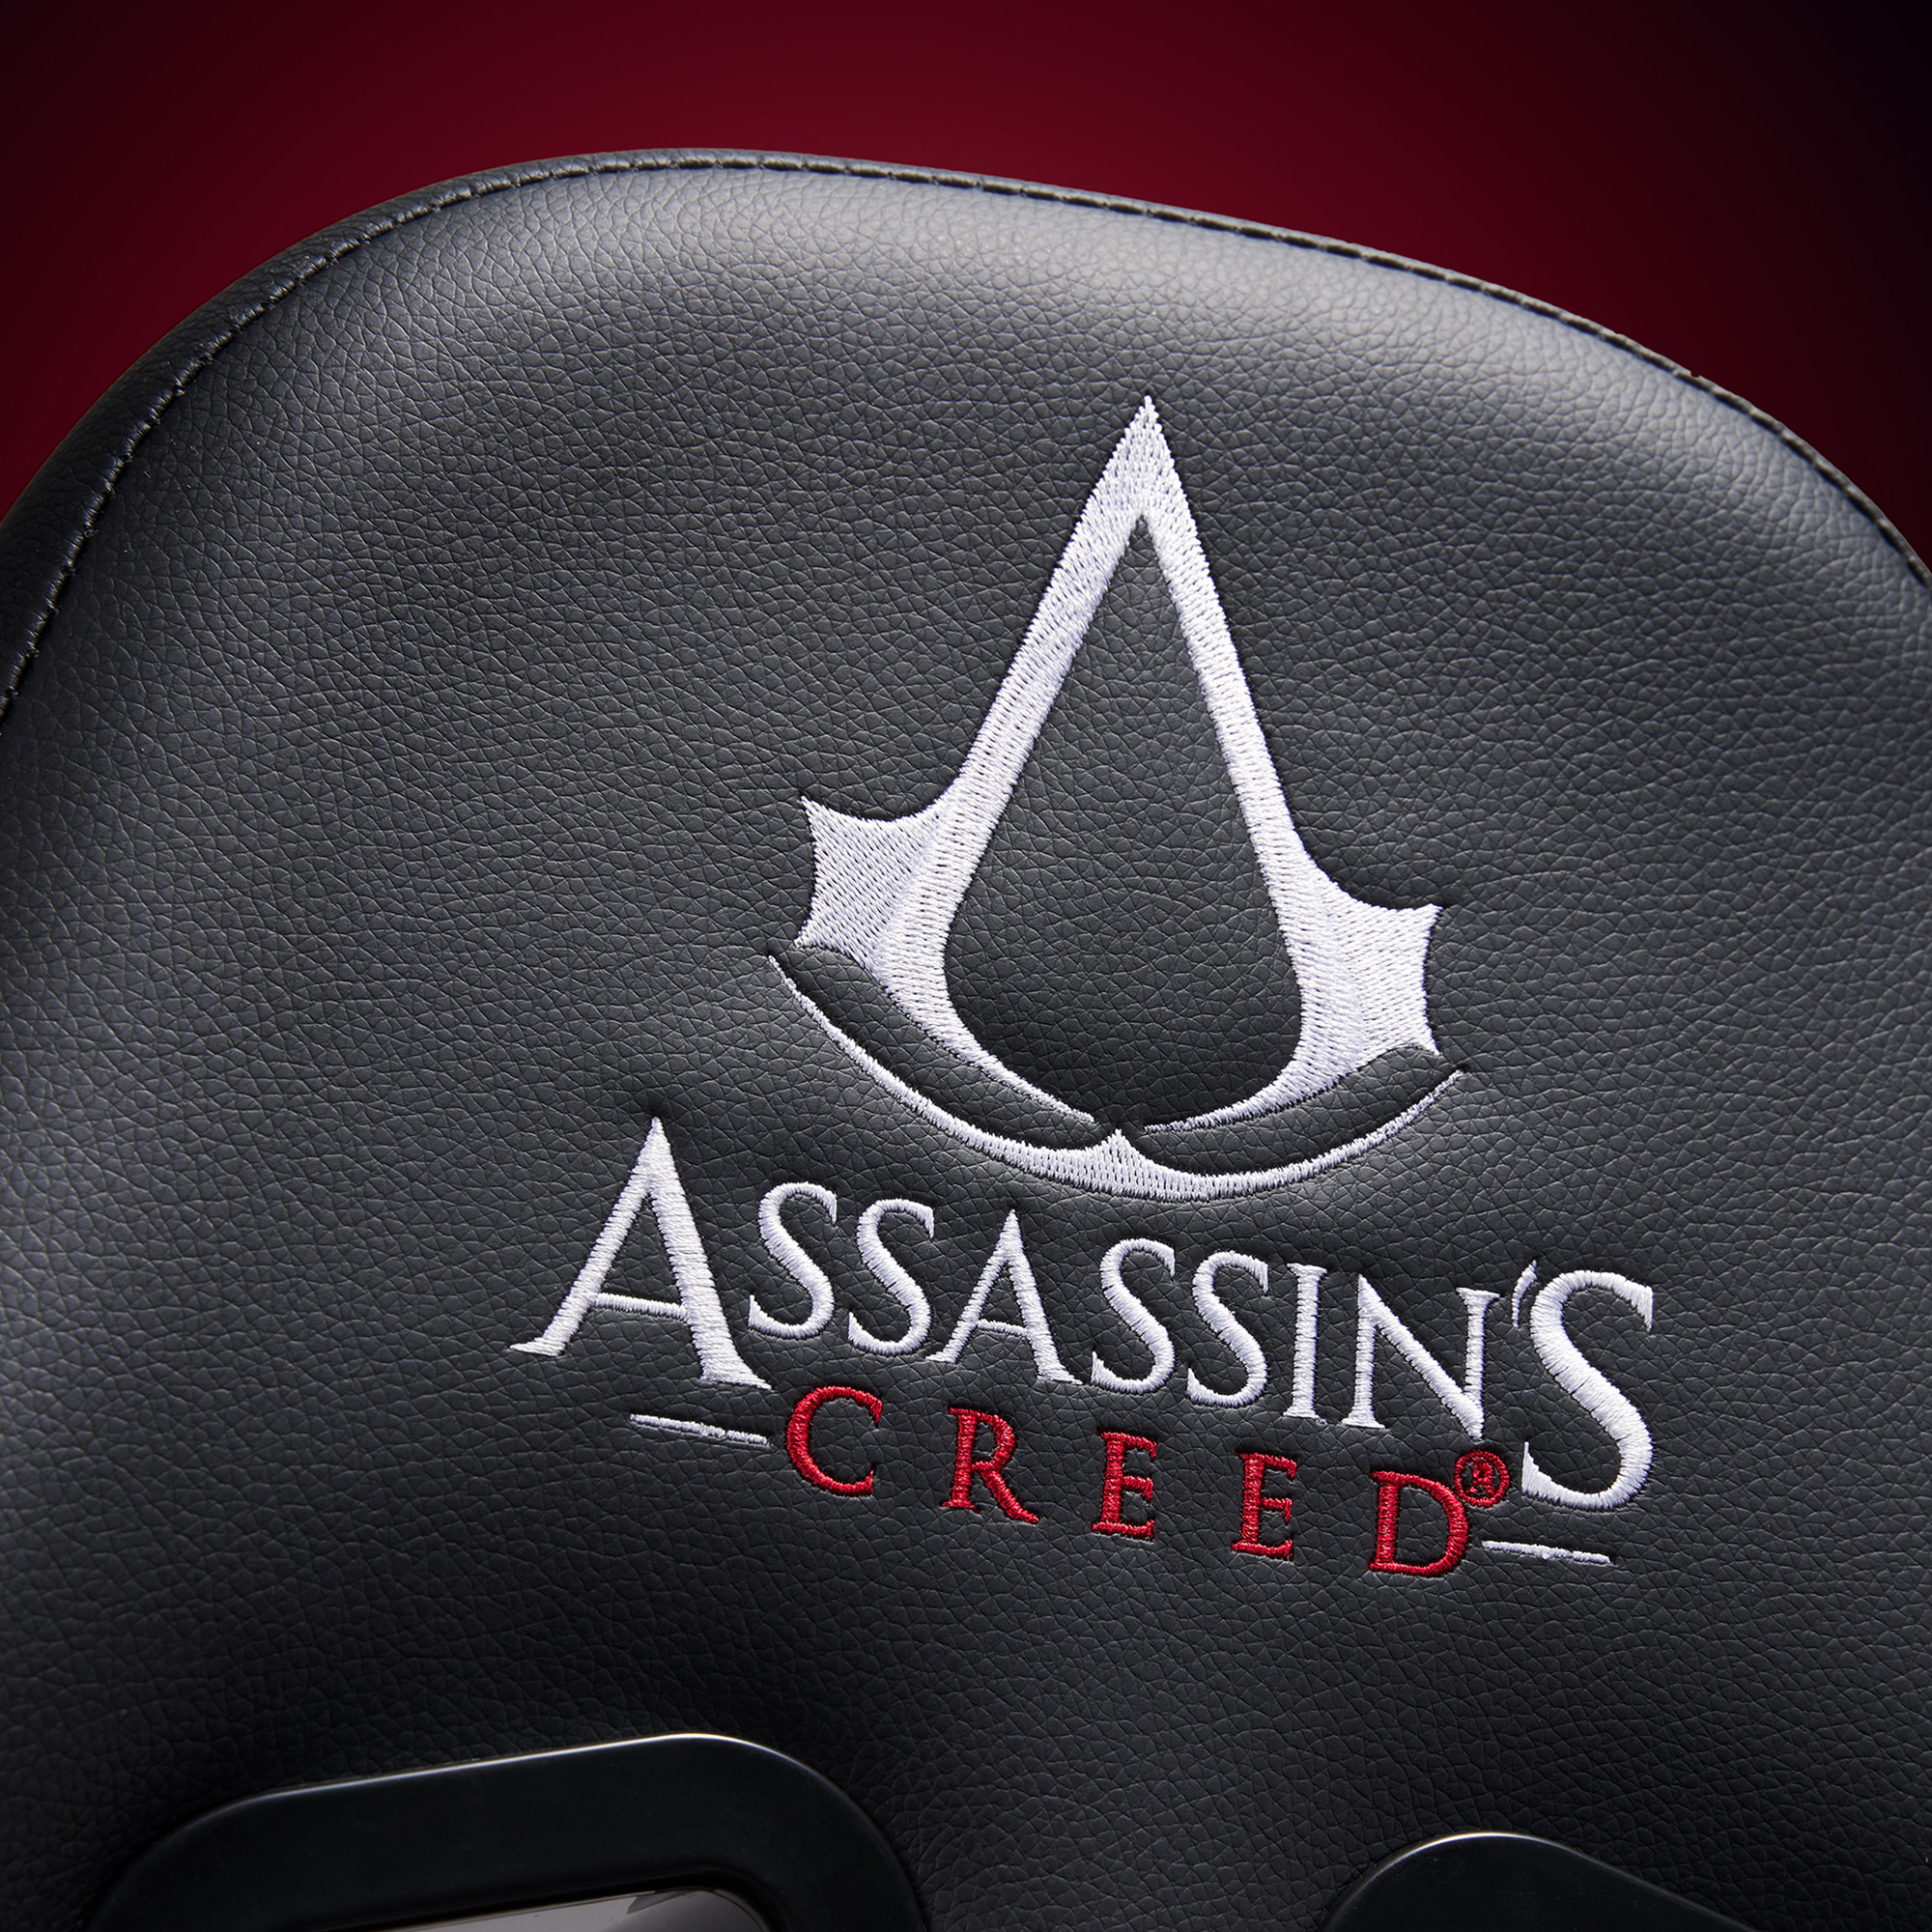 Gaming Chair Adult Assassin's Creed | Subsonic